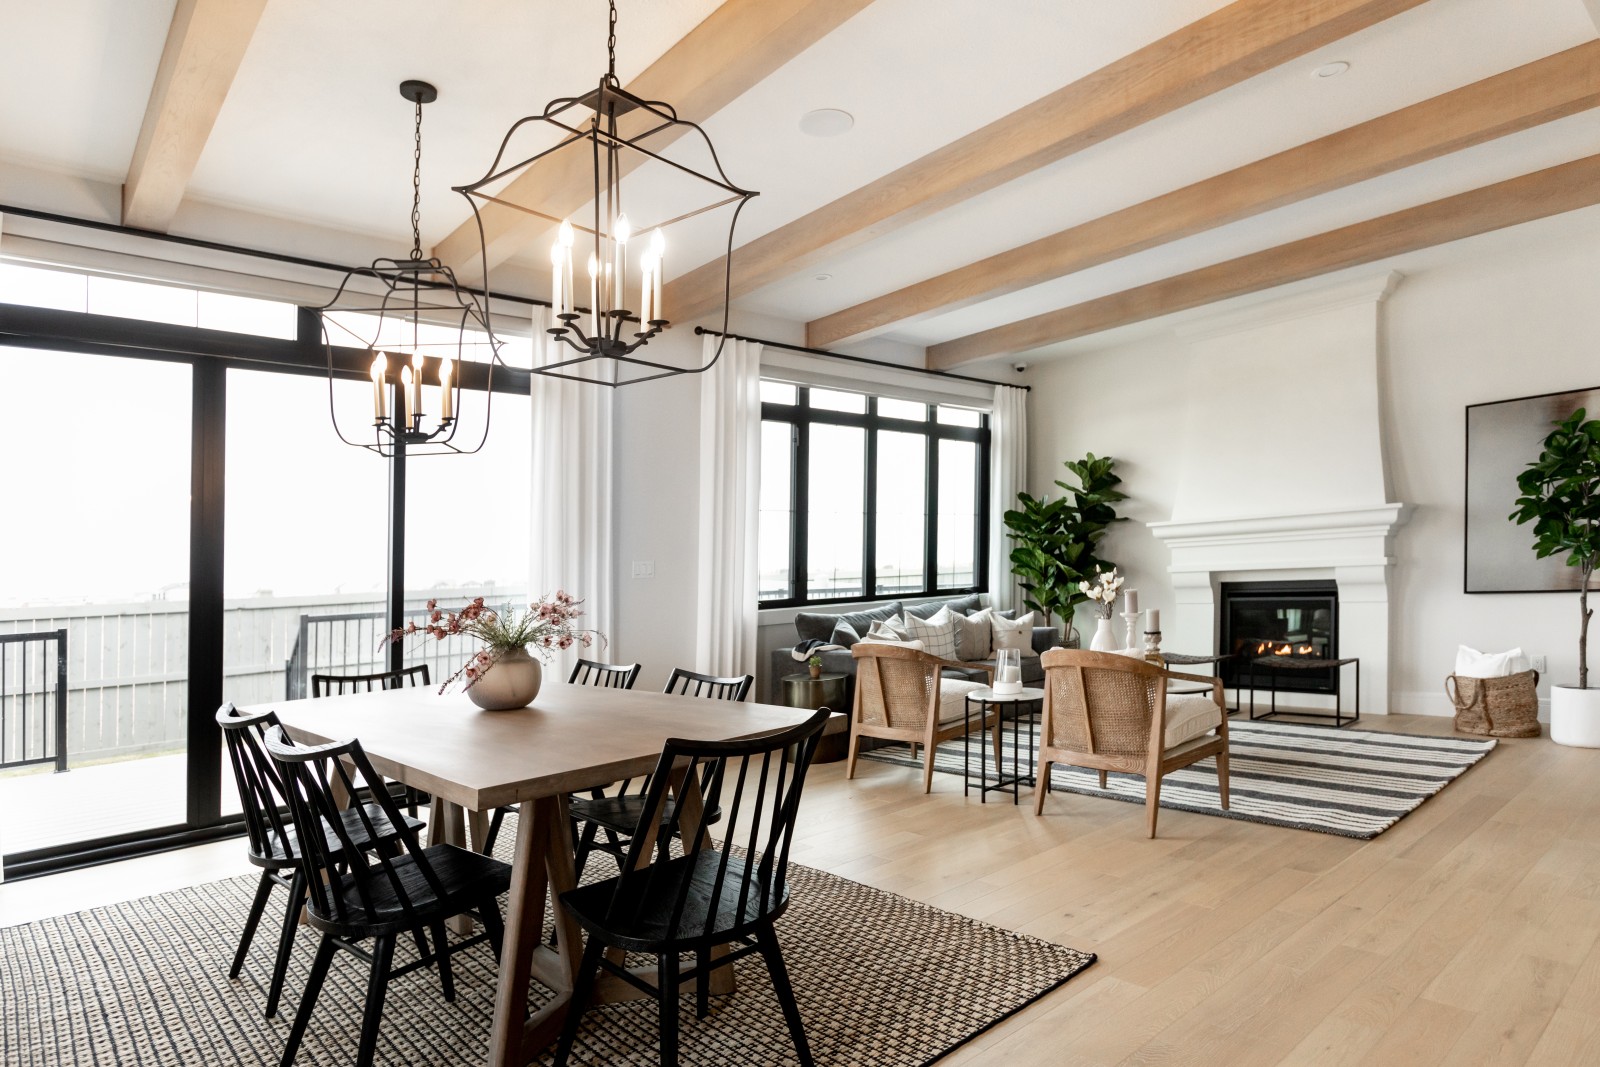 A wider shot of the main floor of the Kalliope Griesbach showhome featuring warm wood beams running across the space. Two large black chandeliers hang above the wood dining table with accenting black chairs. The inviting living room with ten foot tall custom plaster fireplace can be seen in the back of the photo